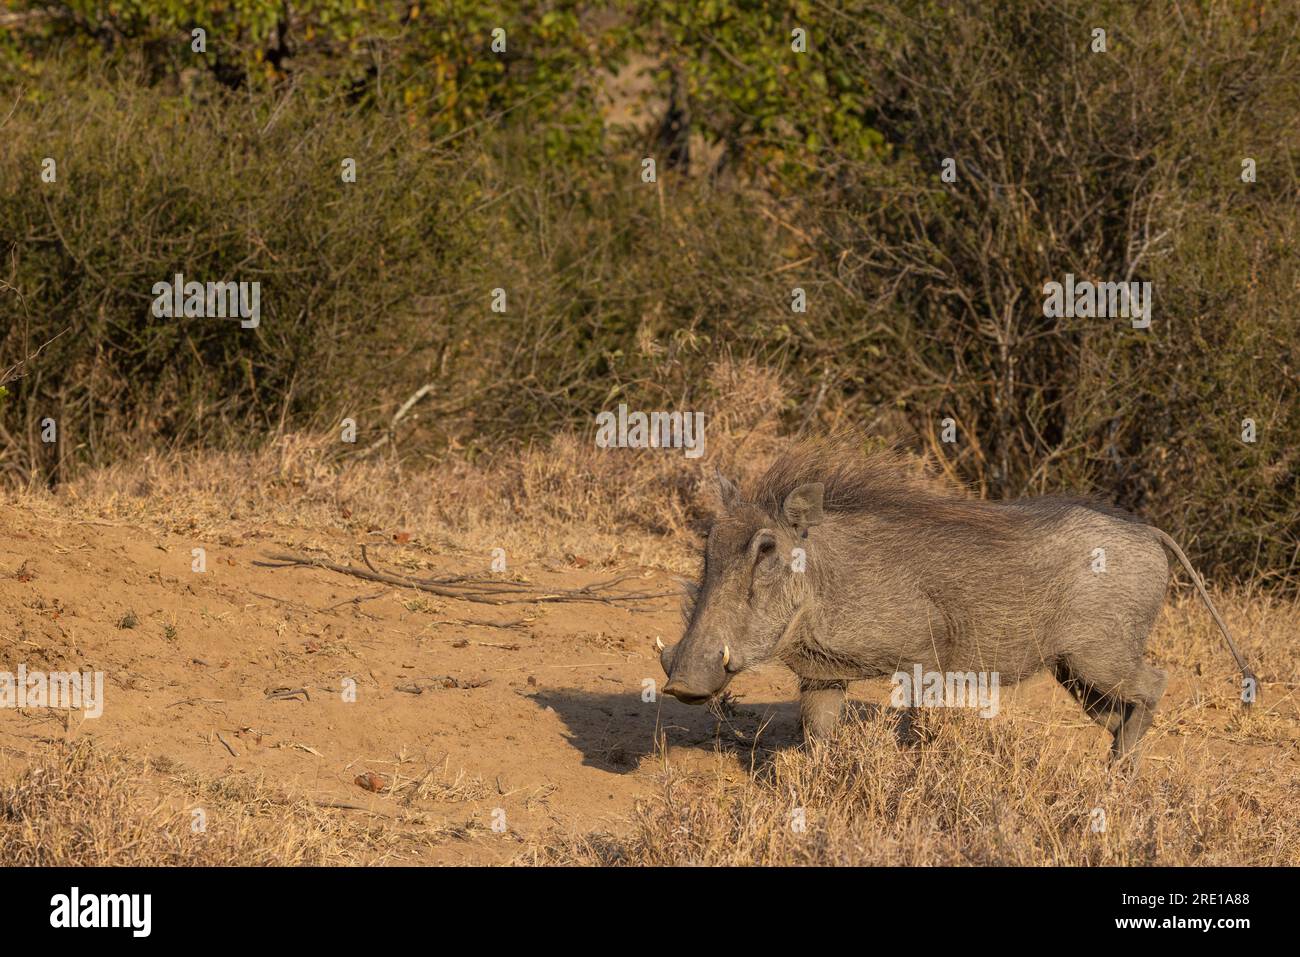 An adult warthog, also known as Phacochoerus africanus, walking in the sunshine at Ingwelala in the Greater Kruger National Park, South Africa Stock Photo